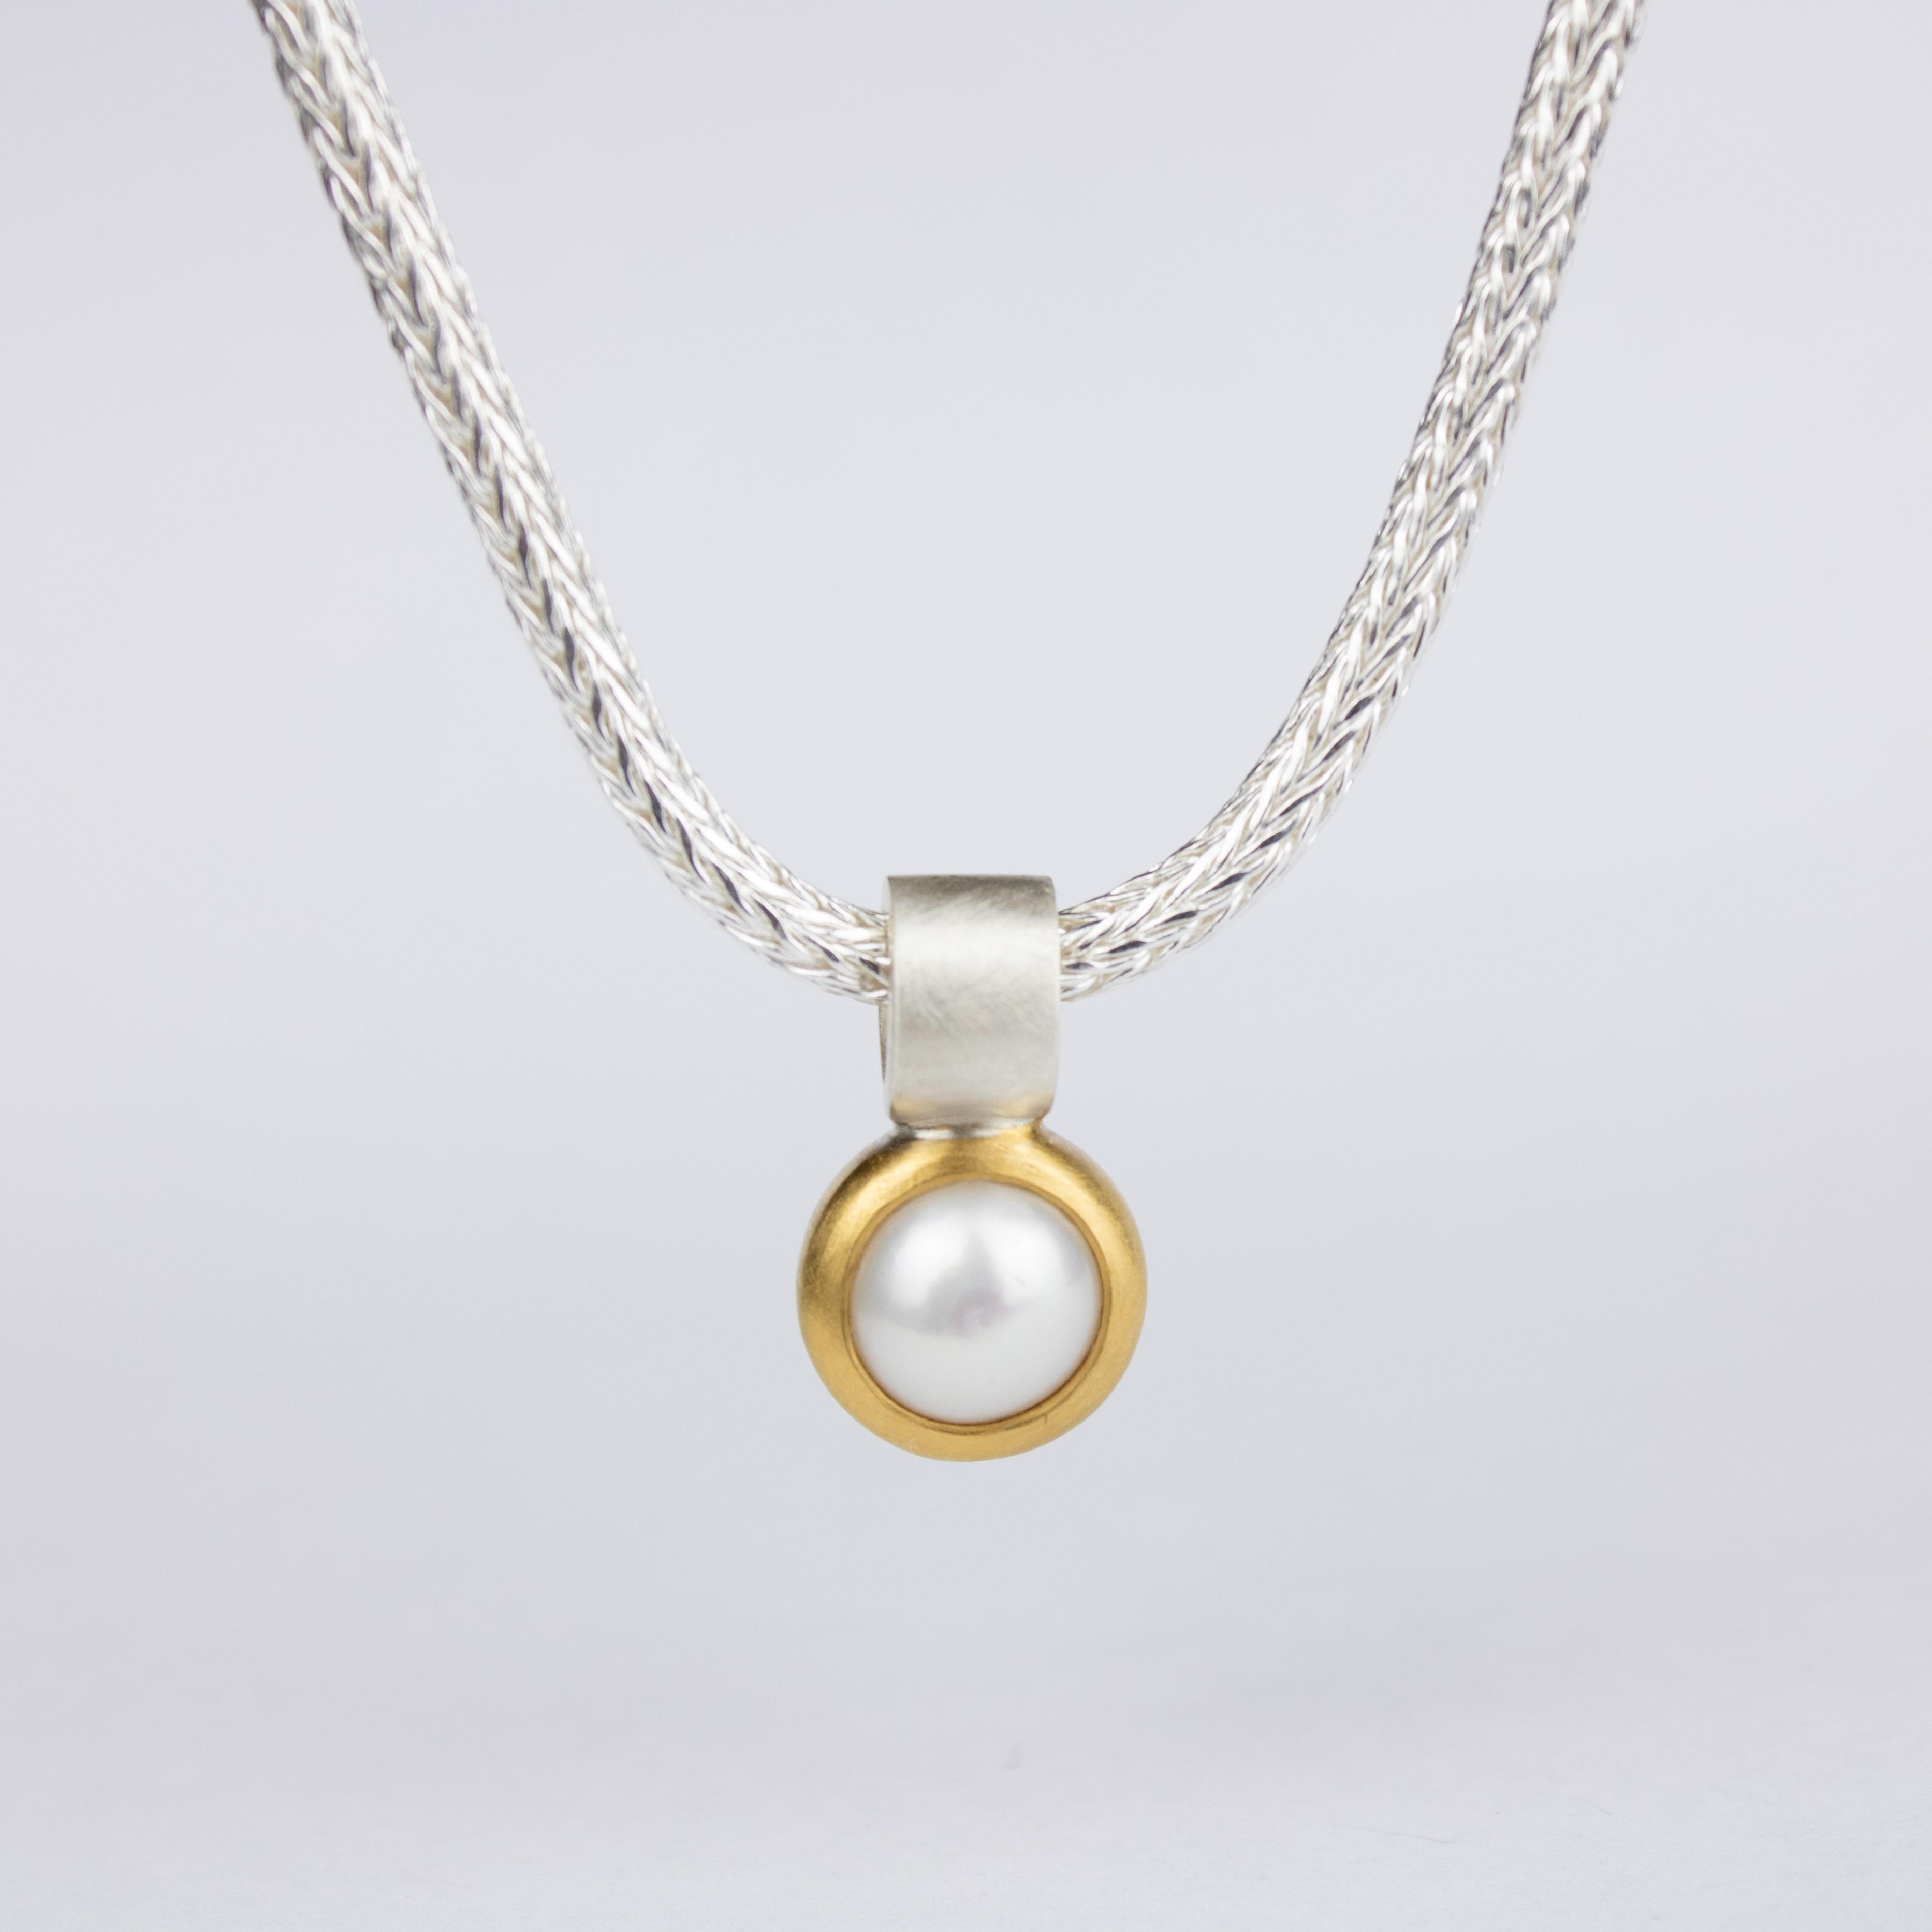 The gold plated Pearl Pendant made from Sterling Silver is part of the Pearl Collections and symbolizes the natural beauty and high quality designs of Monika Herré.

 

The wide rail gives the pendant the necessary stability to smoothly swing on a